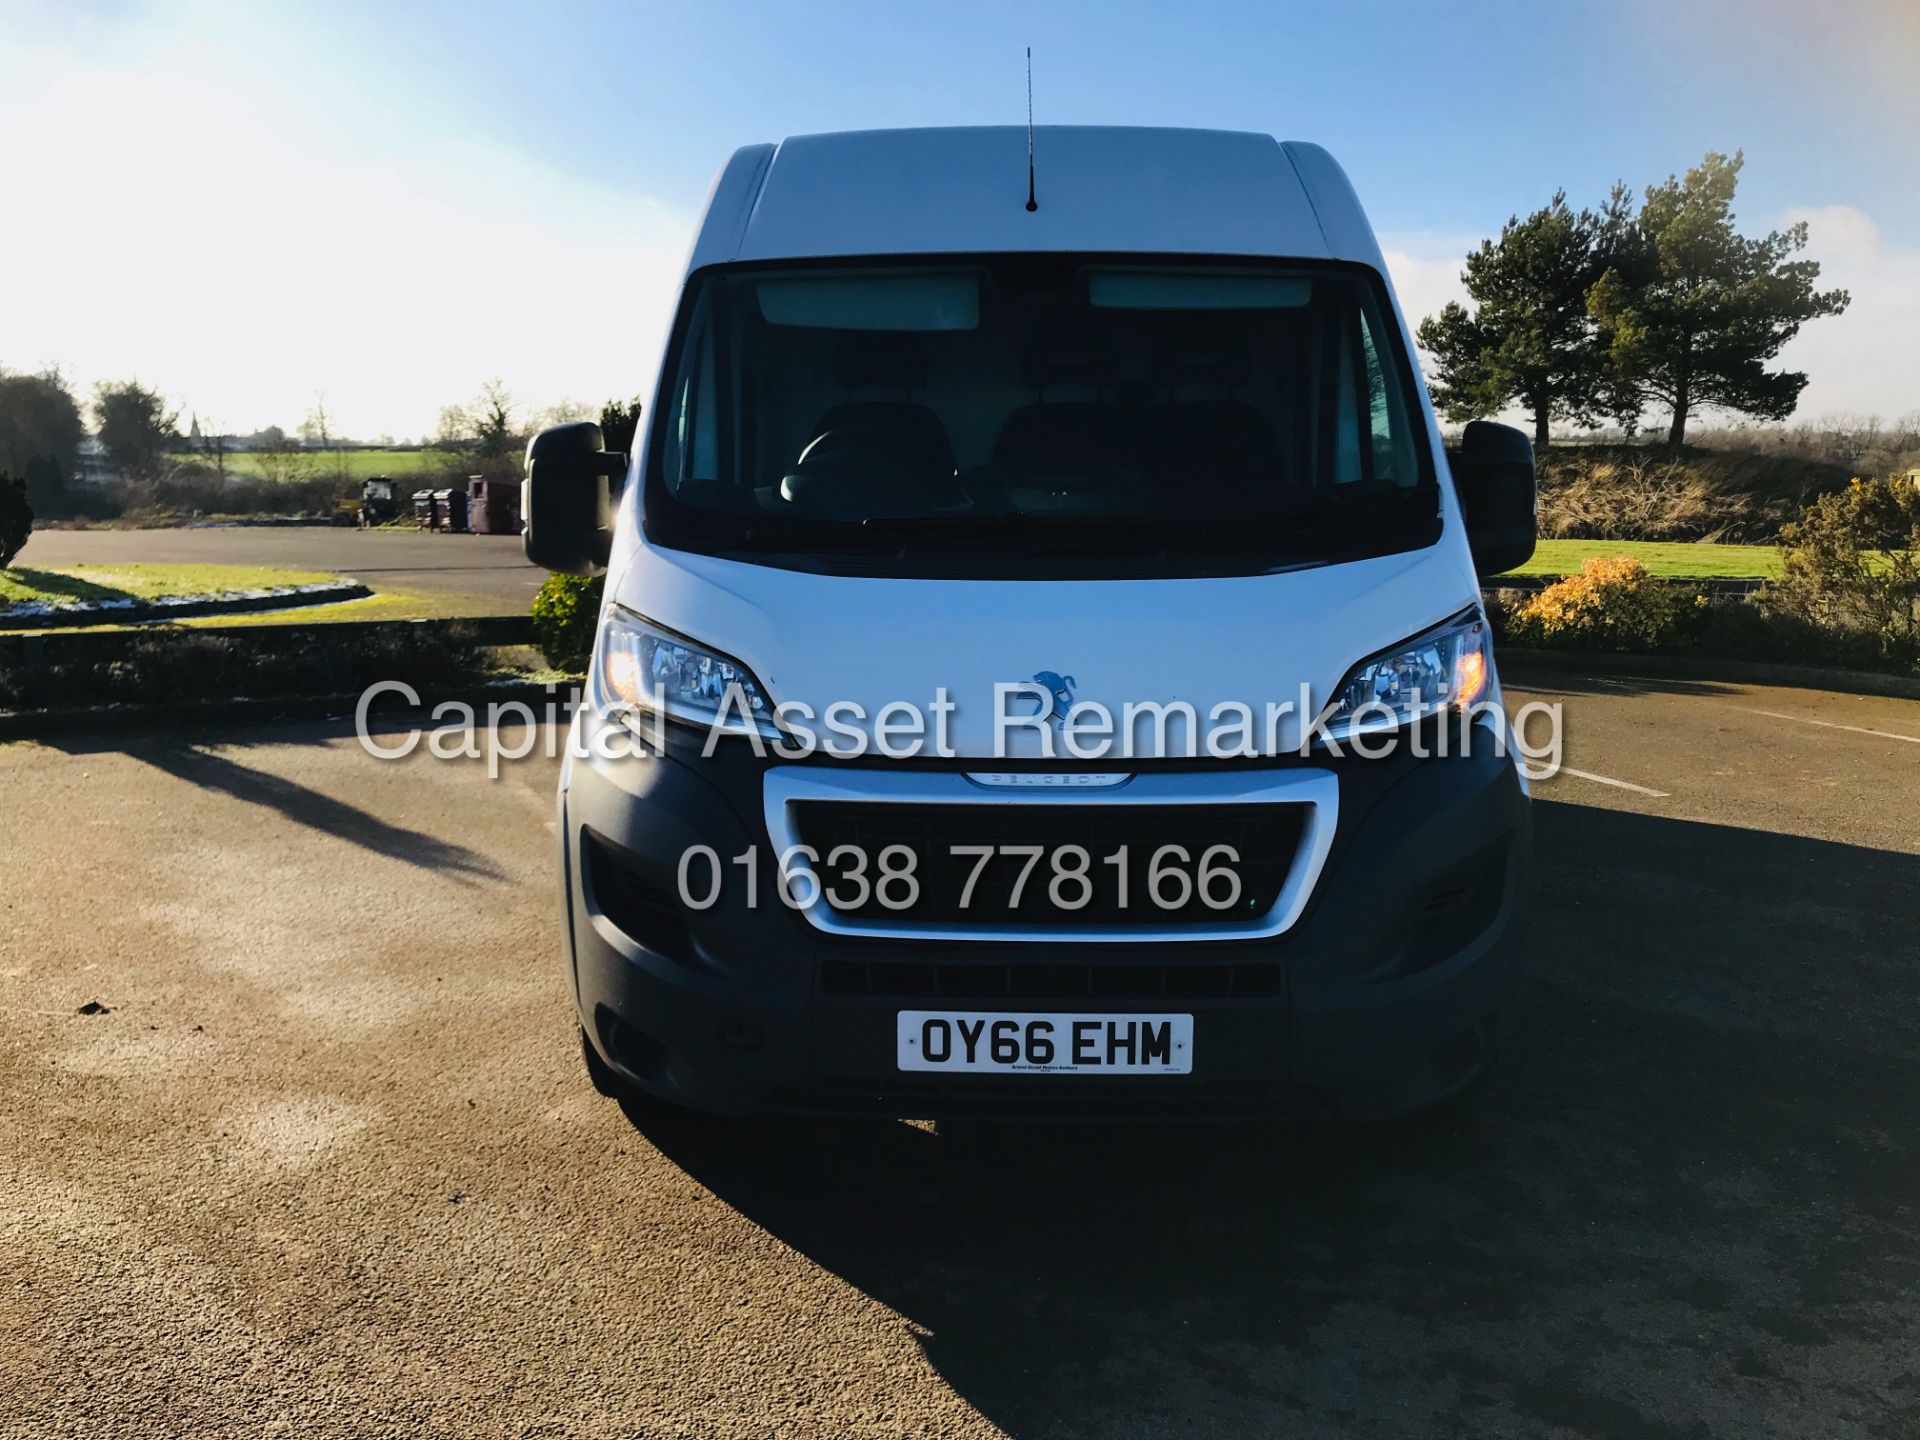 (ON SALE) PEUGEOT BOXER 2.0HDI-BLUE "PROFESSIONAL" L3H2 (2017 MODEL) 1 OWNER - AIR CON - EURO 6 - Image 2 of 13